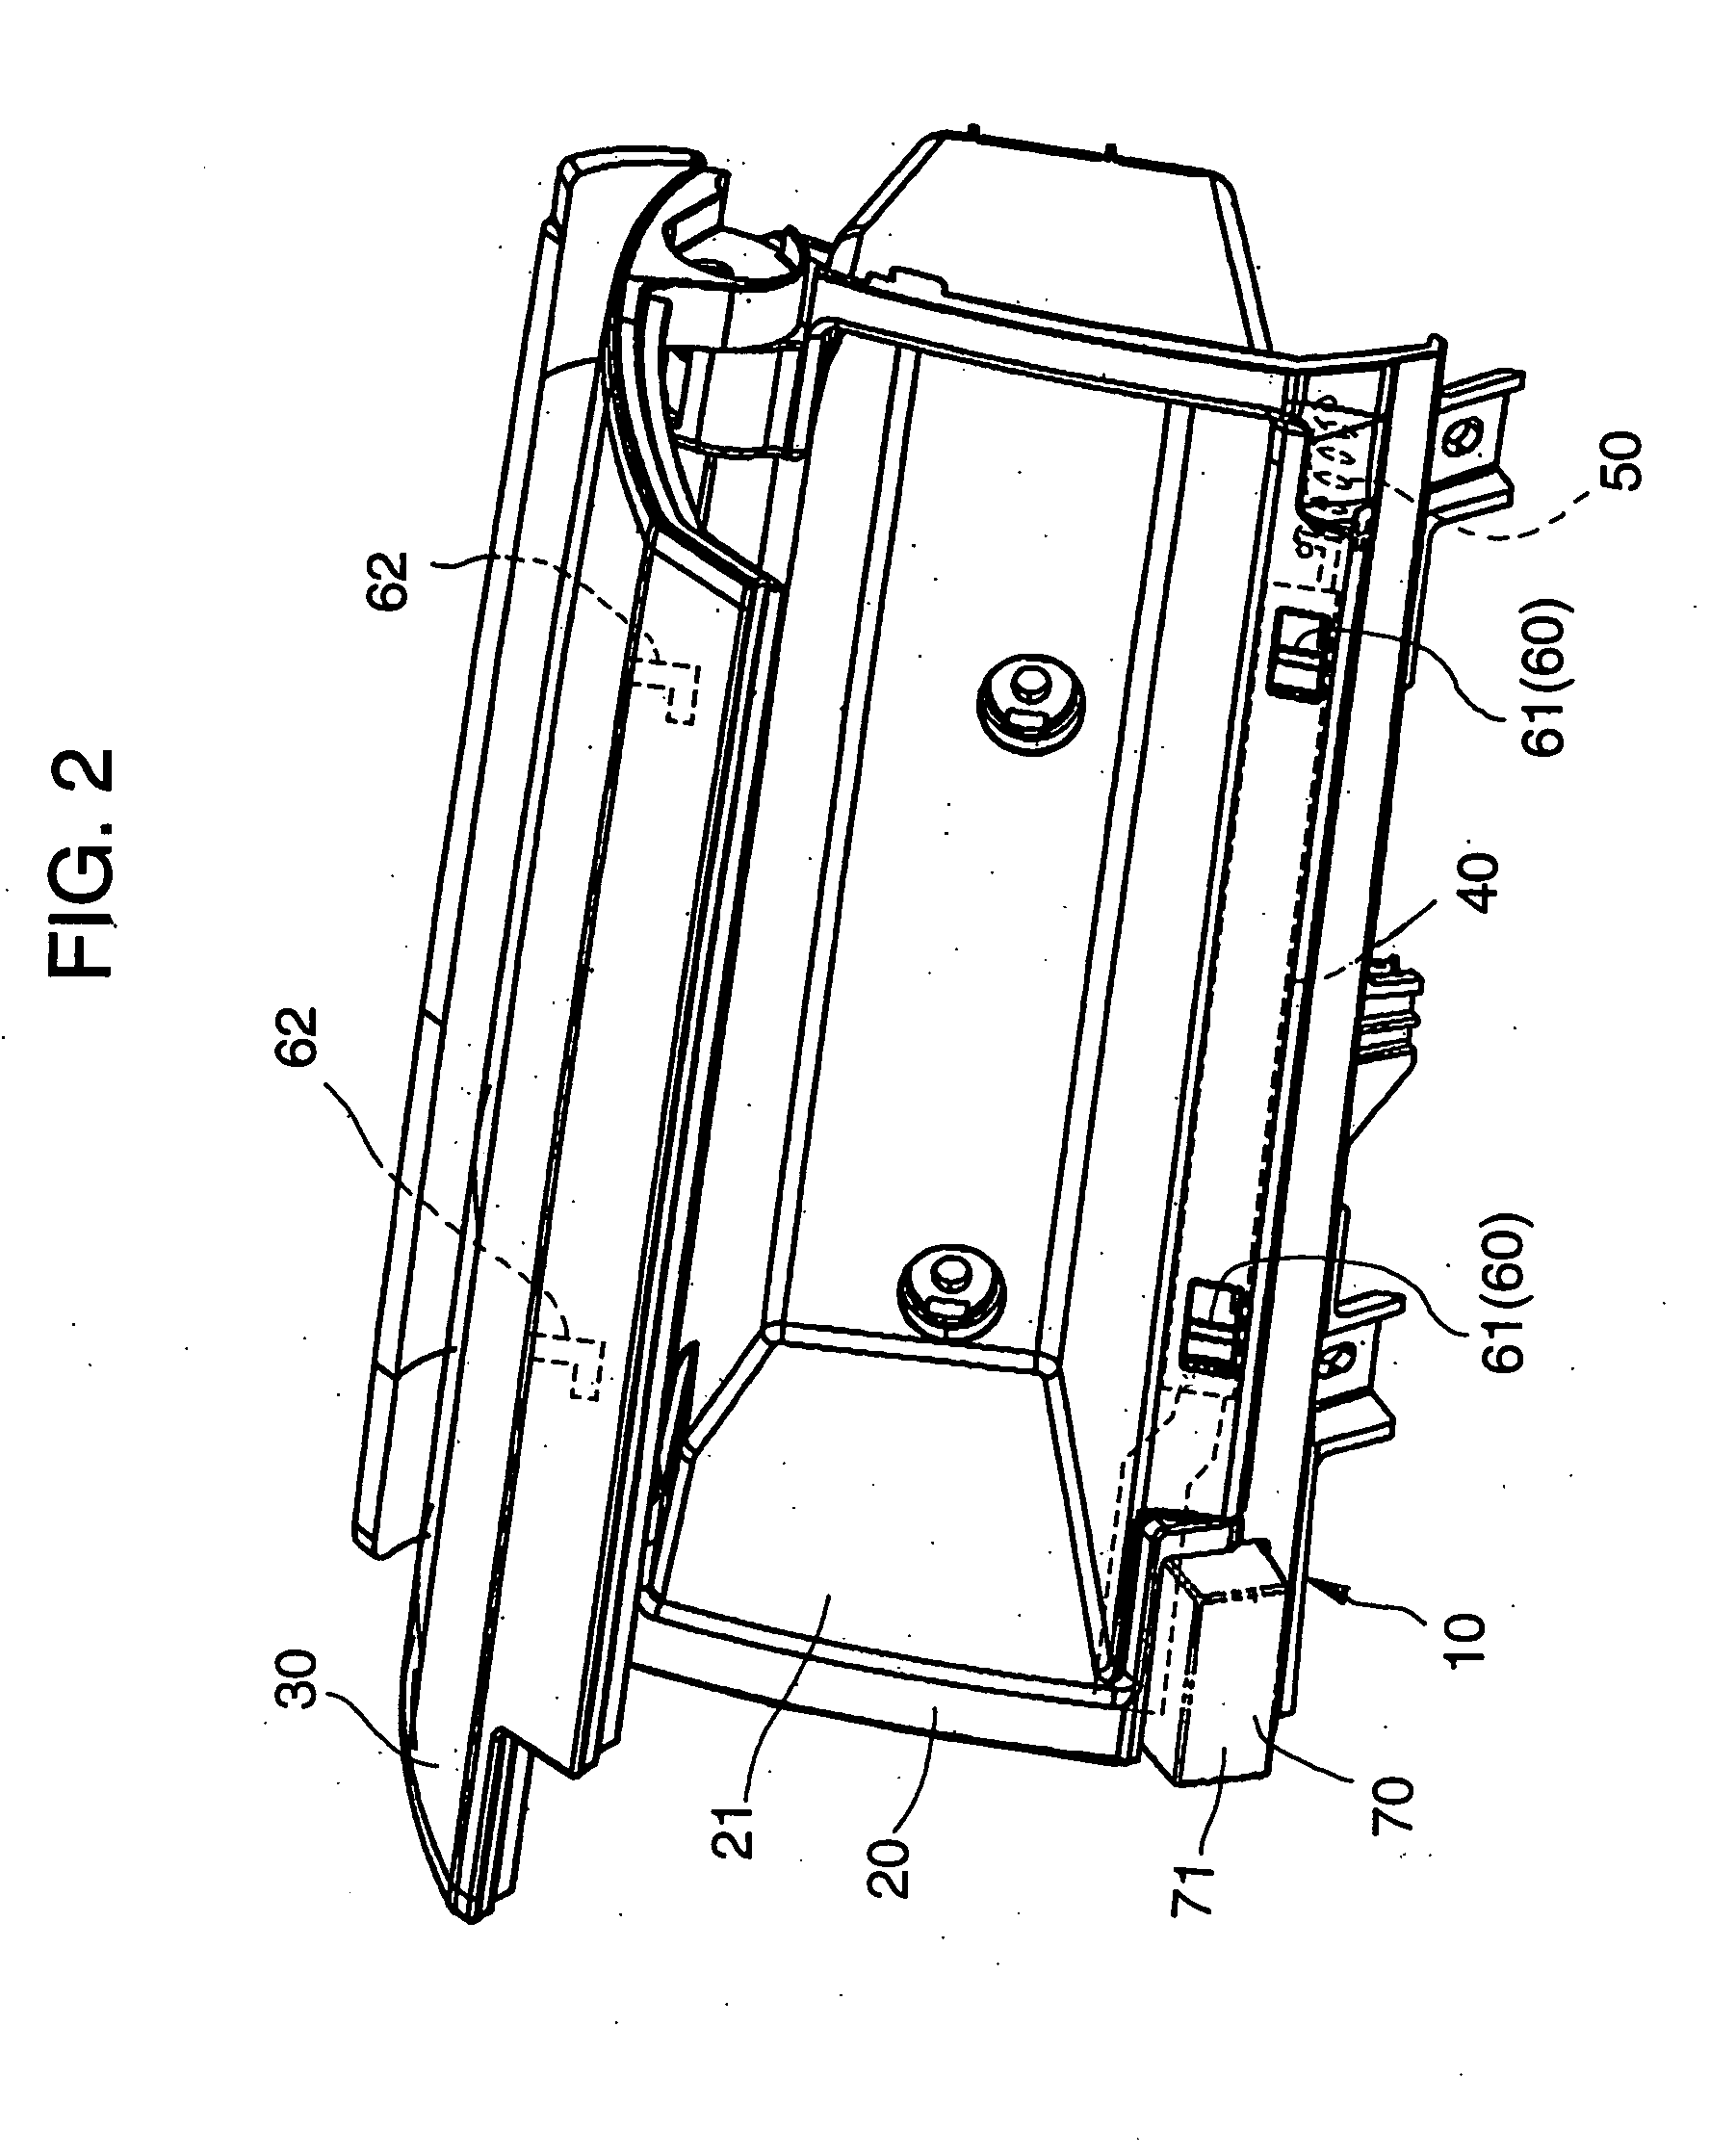 Container apparatus of a vehicle